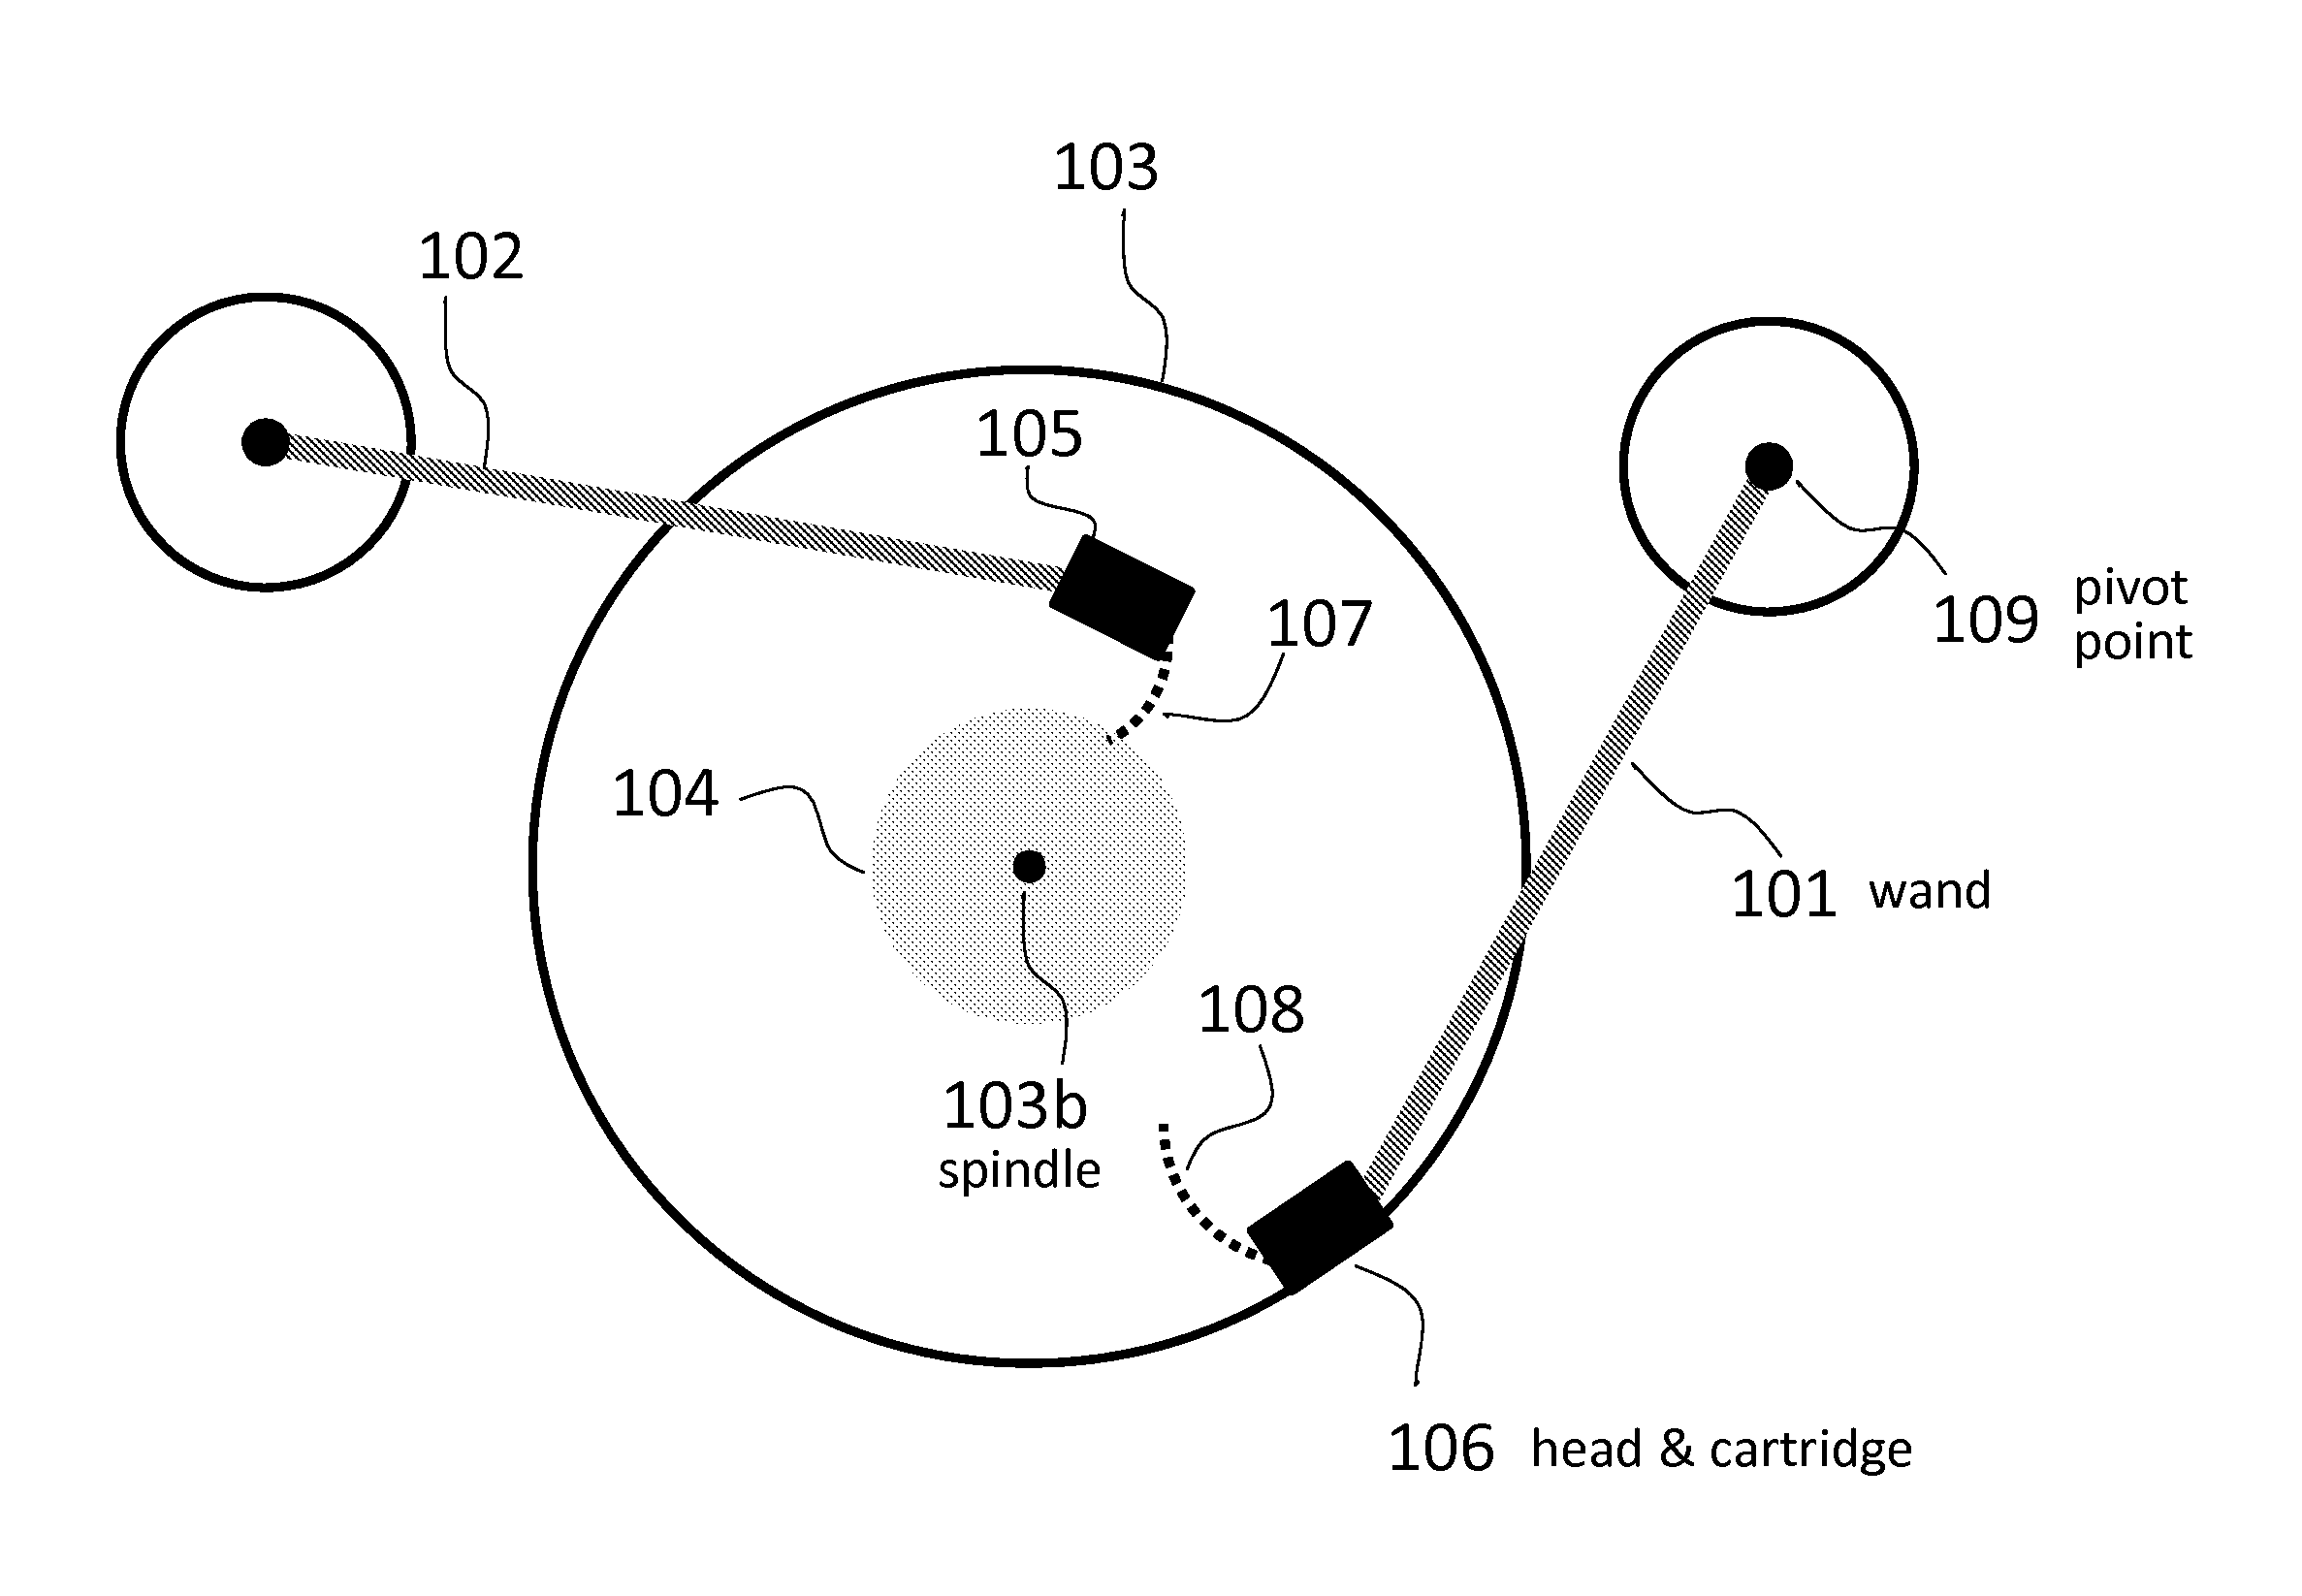 Systems and methods for reducing audio distortion during playback of phonograph records using multiple tonearm geometries